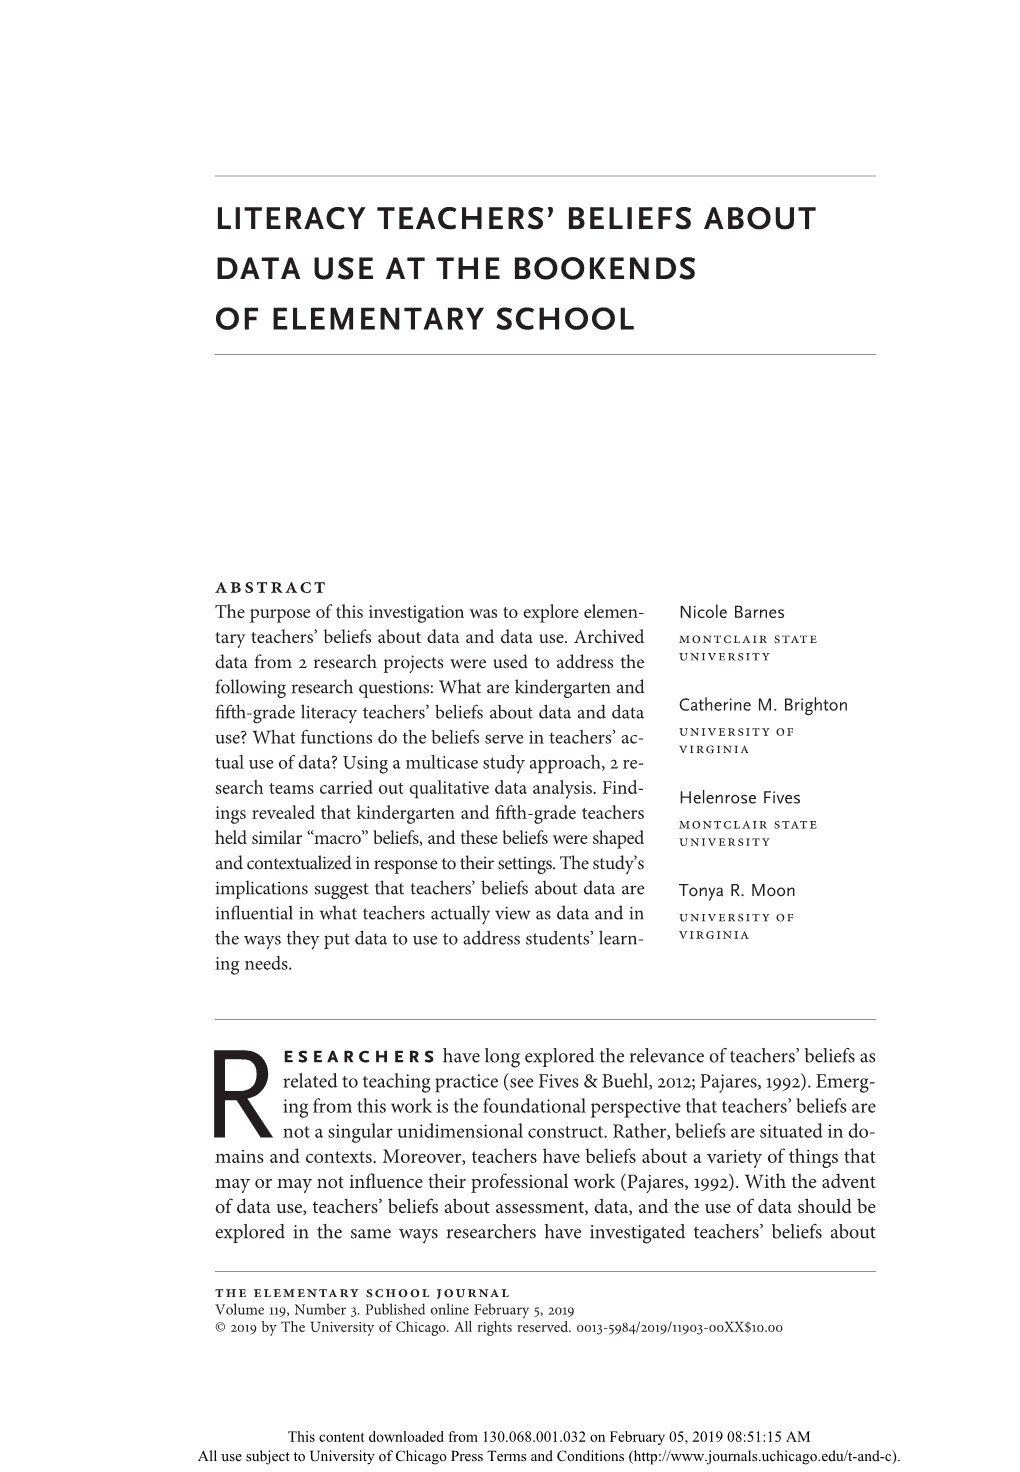 Literacy Teachers' Beliefs About Data Use at the Bookends of Elementary